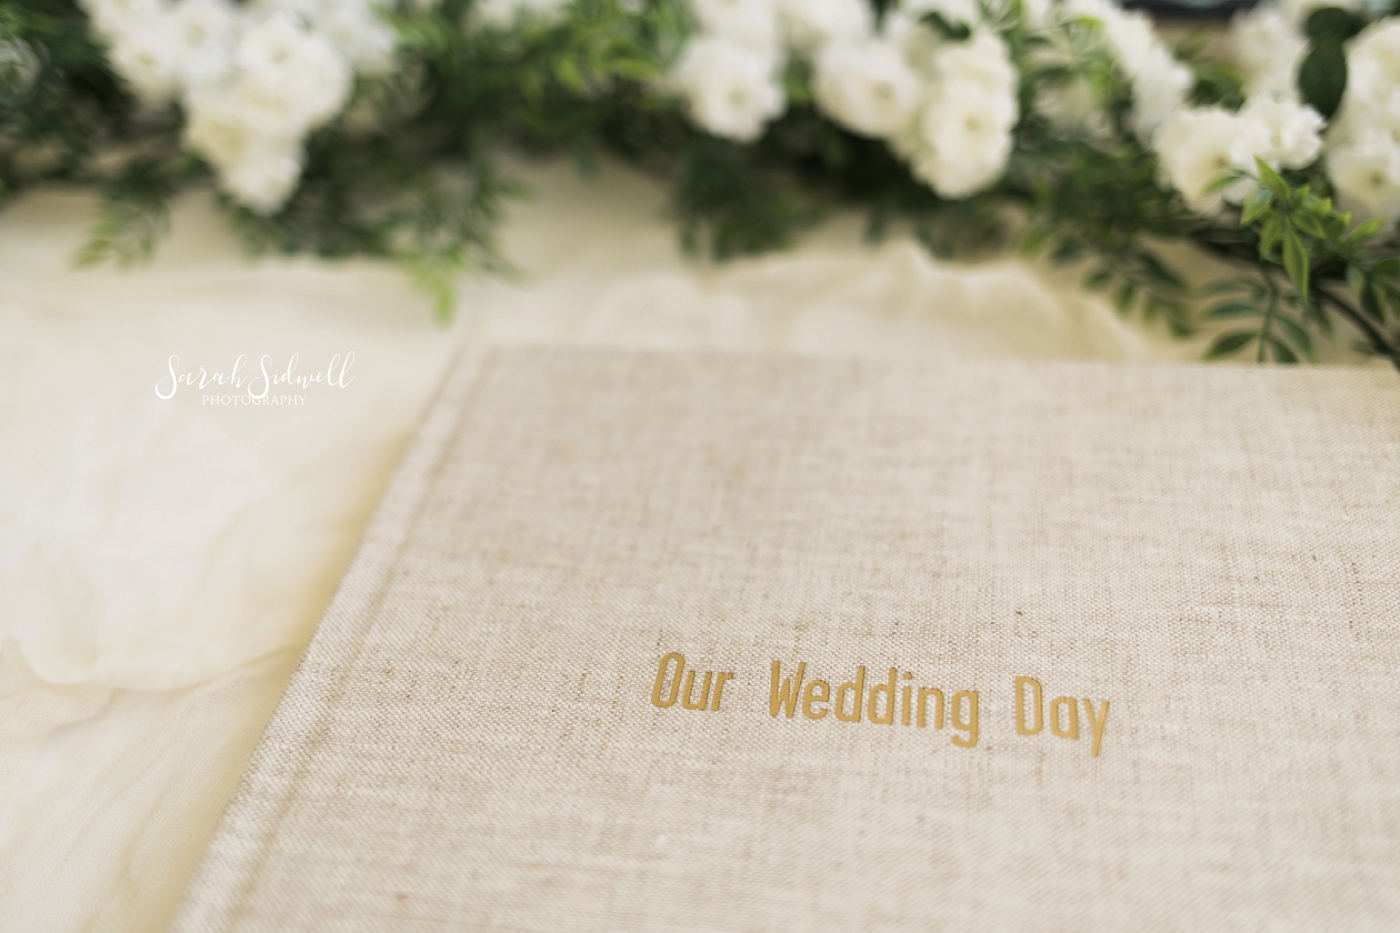 A wedding album is displayed with gold etching on the front. 